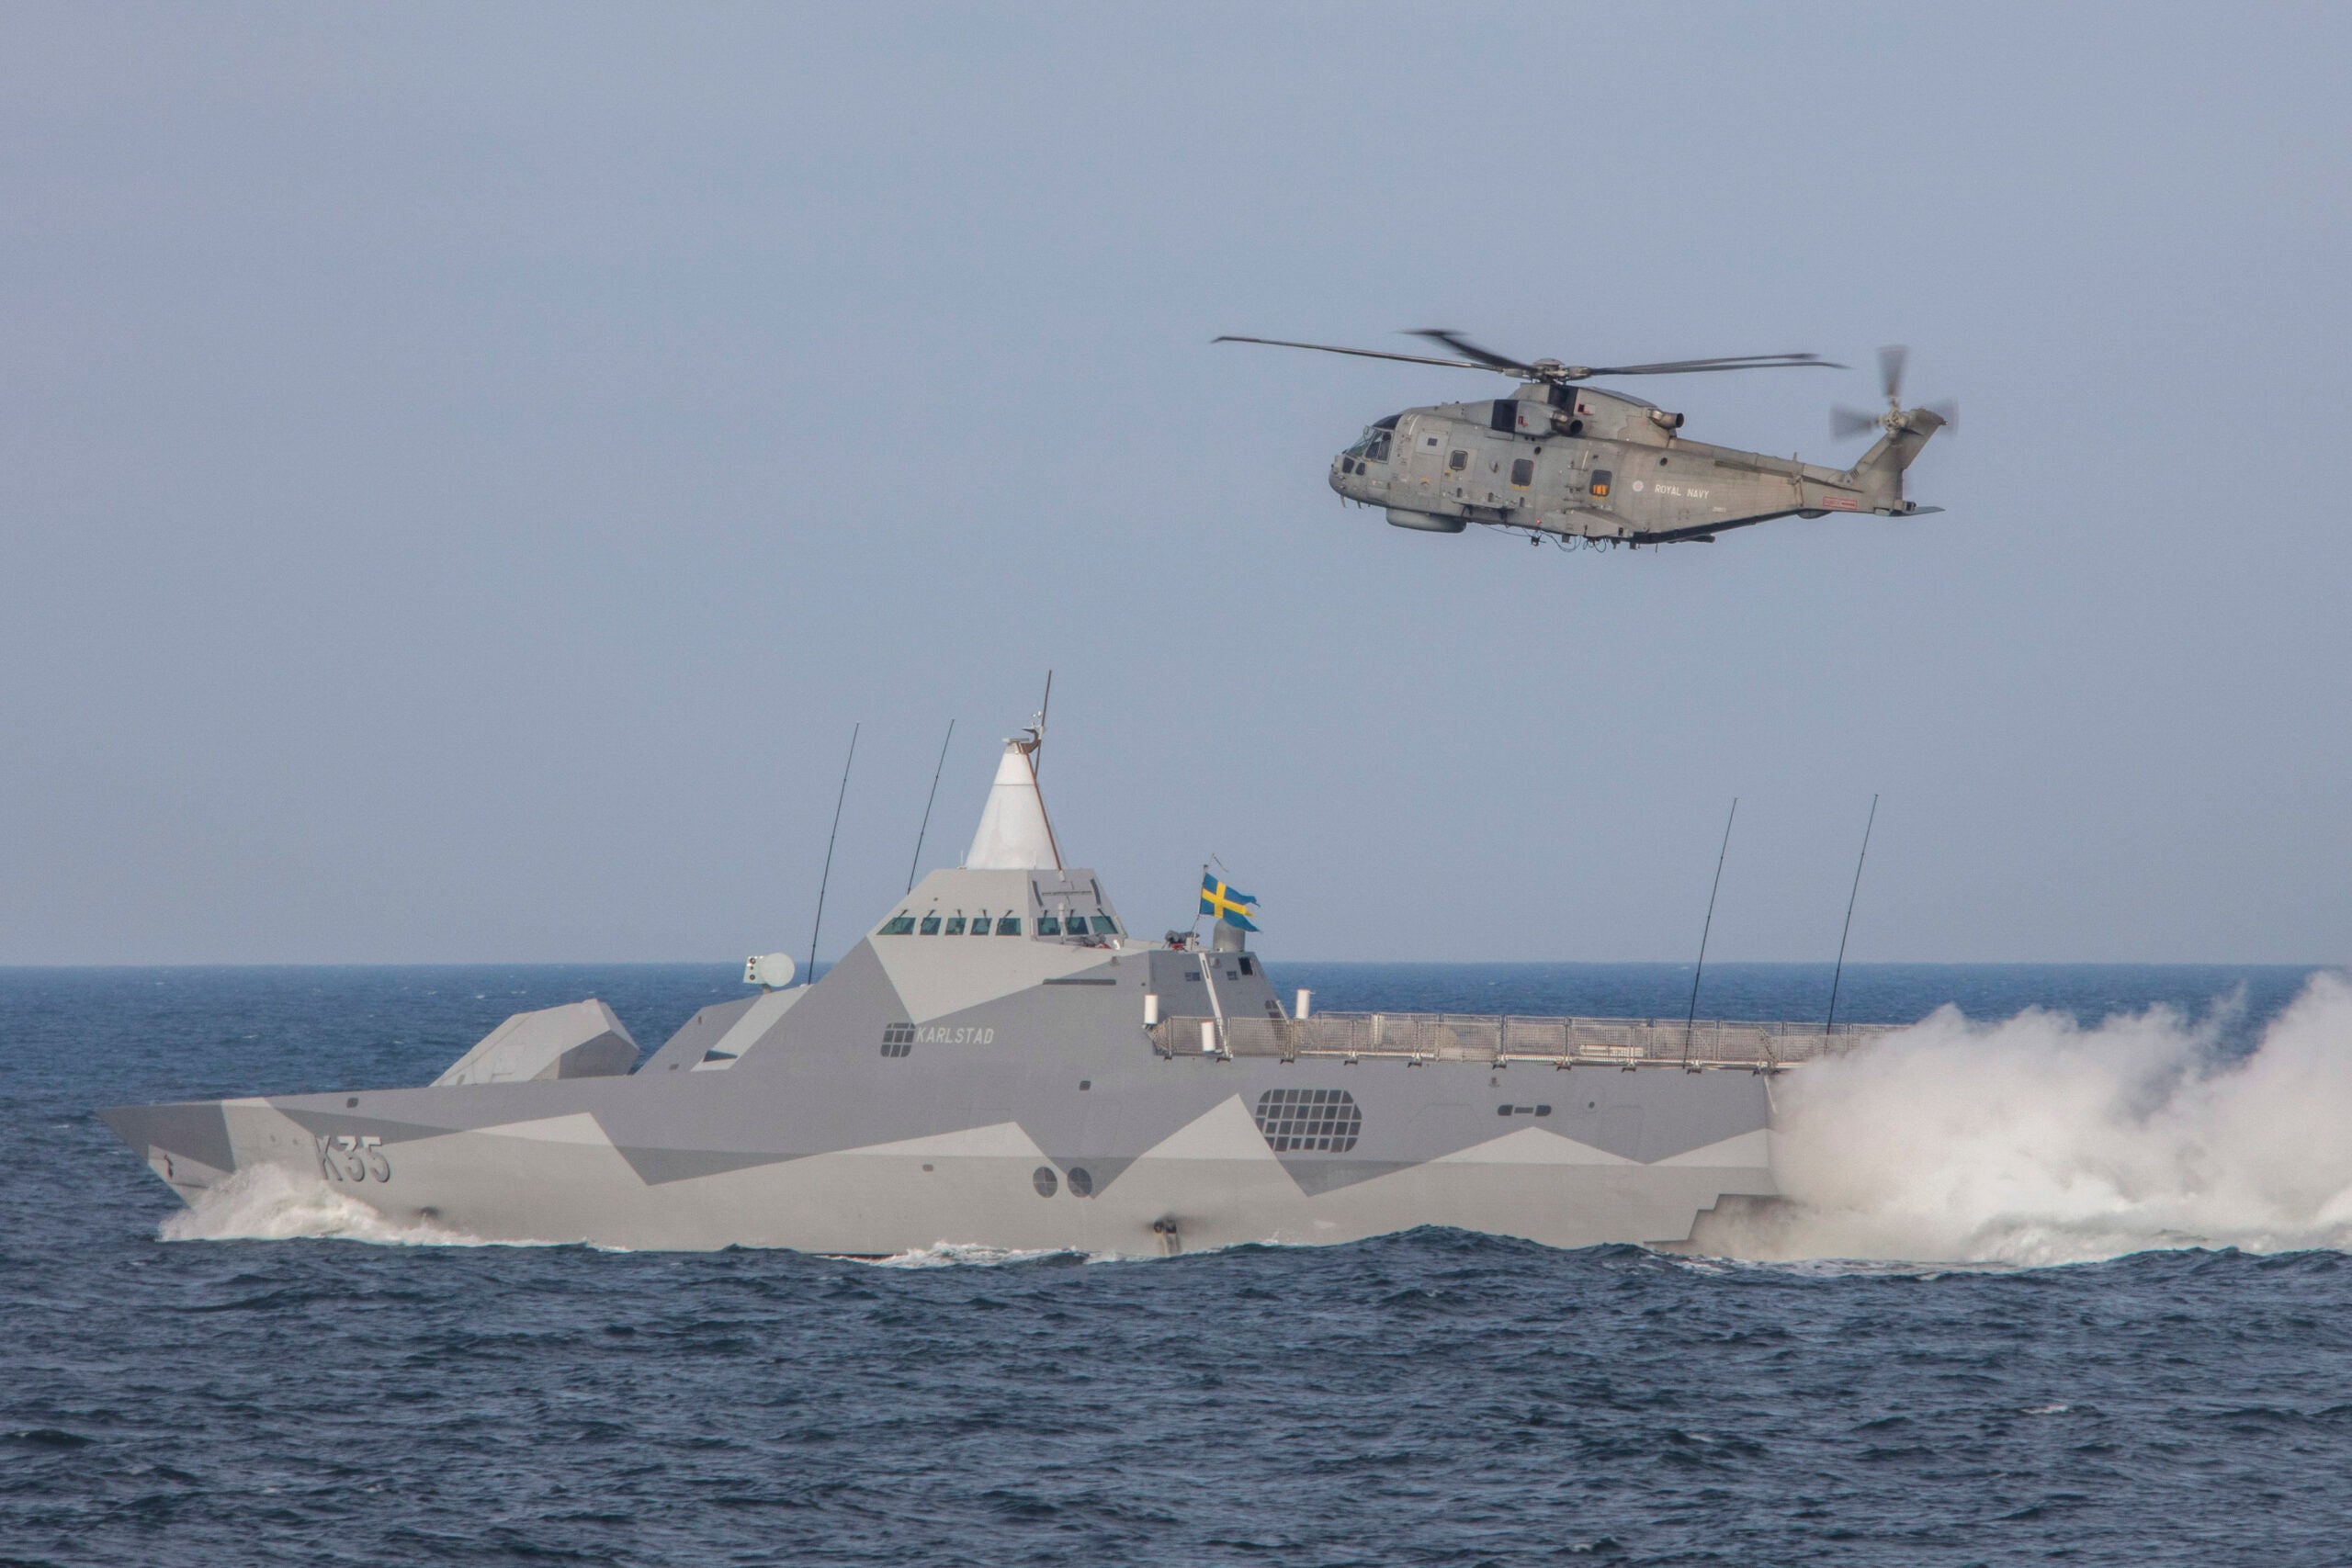 Pictured are Swedish Corvette HSwMS Karlstad and Royal Navy Merlin helicopter taking part in a surface exercise with partnering NATO warships whilst participating in BALTOPS 20.

On Friday 12th June 2020, Royal Navy ships took part in a surface engagement exercise (SURFEX) with NATO ships whilst on BALTOPS 20.

The NATO exercise which takes place each year will see various countries take part in gunnery serials, man overboard exercises, air defence and anti-submarine exercises, and not to mention close proximity sailing.

The Visby class is the latest class of corvette to be adopted by the Swedish Navy after the Göteborg and Stockholm-class corvettes. 

The ship's design heavily emphasizes low visibility, radar cross-section and infrared signature.